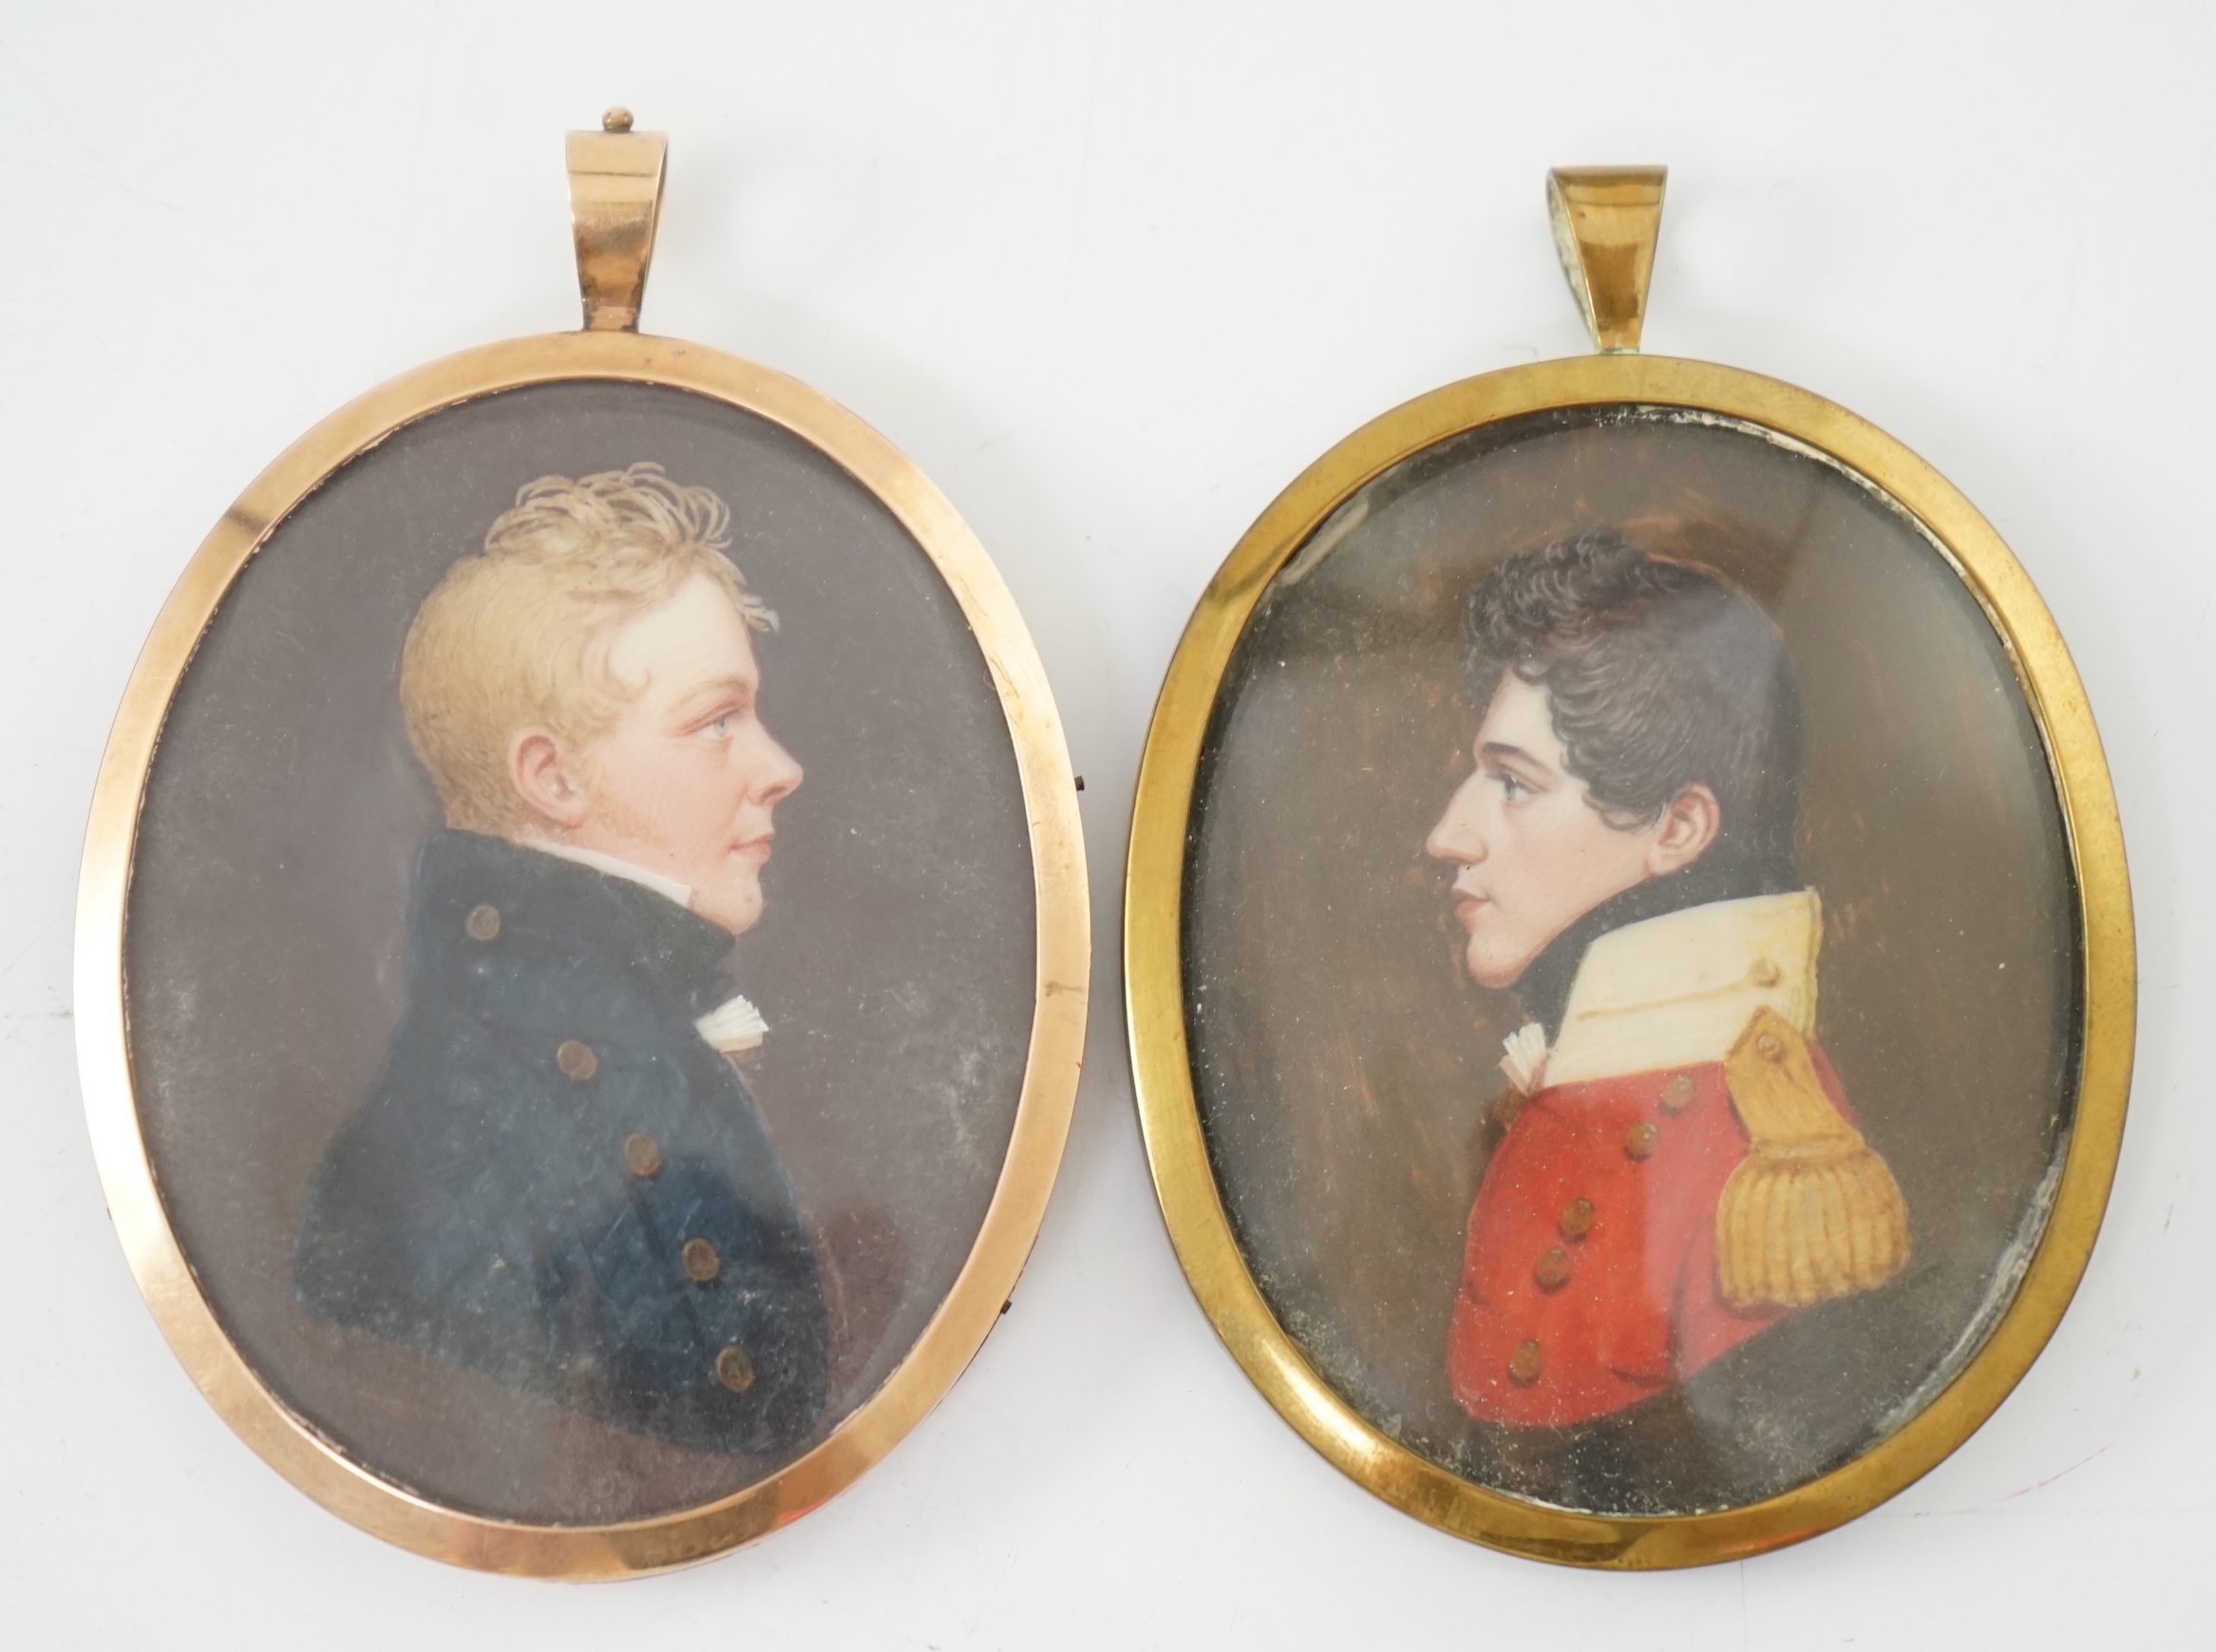 Mrs Anna Trewinnard (fl.1797-1806), Portrait miniatures of two army officers, watercolour on ivory, 6.5 x 5.3cm. & 6.8 x 5.4cm. CITES Submission reference TQRJHQEF